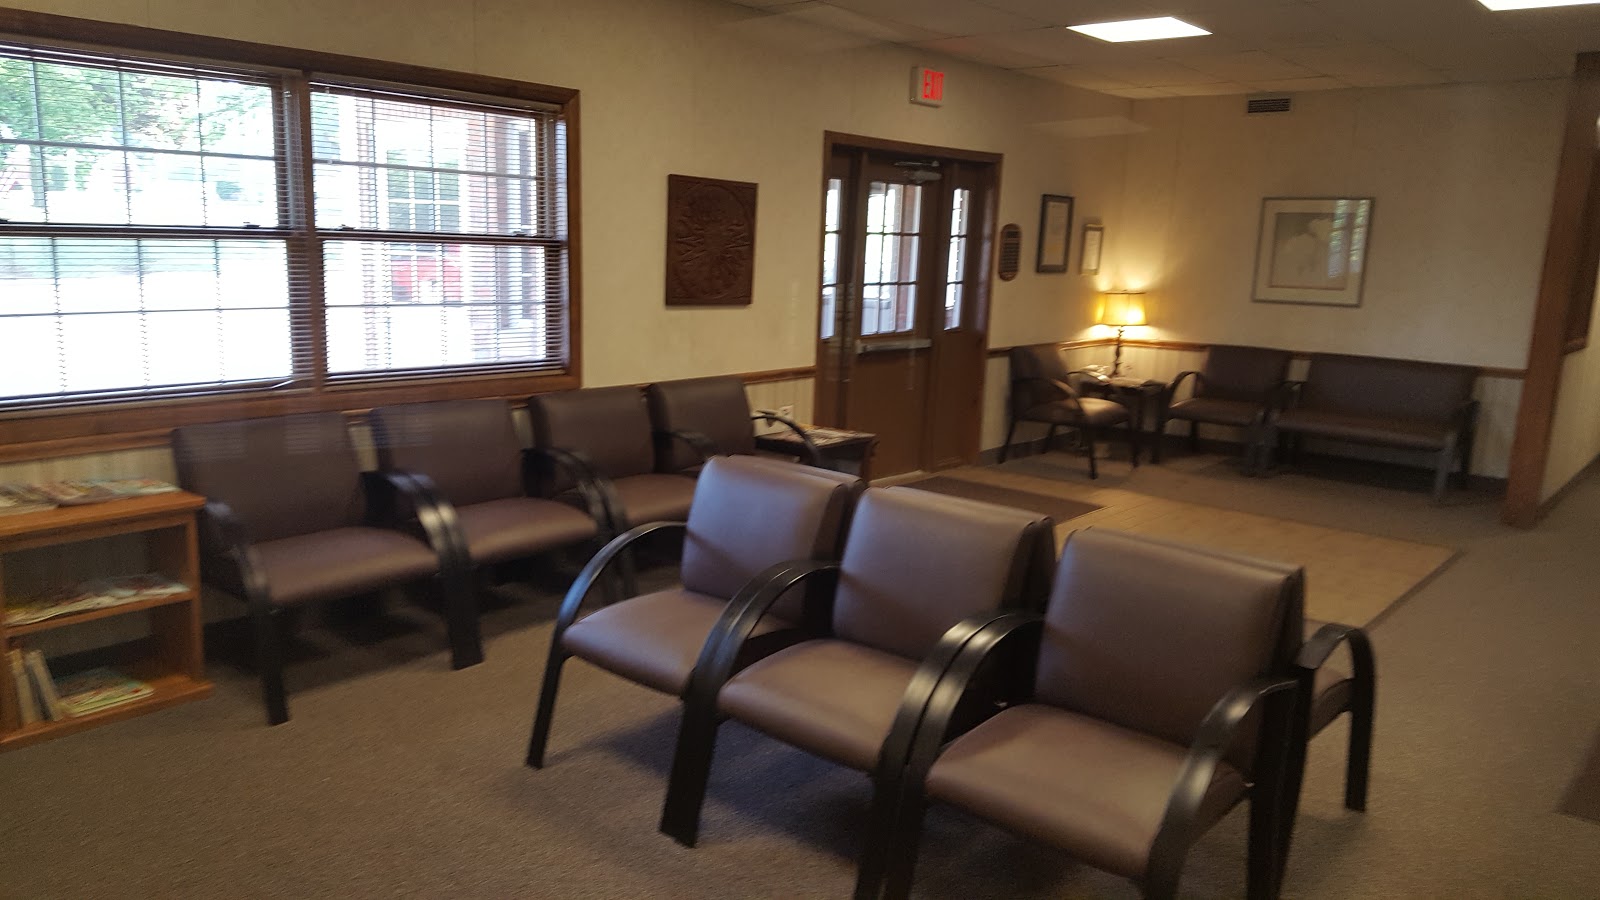 Counseling Center of Wayne and Holmes Counties